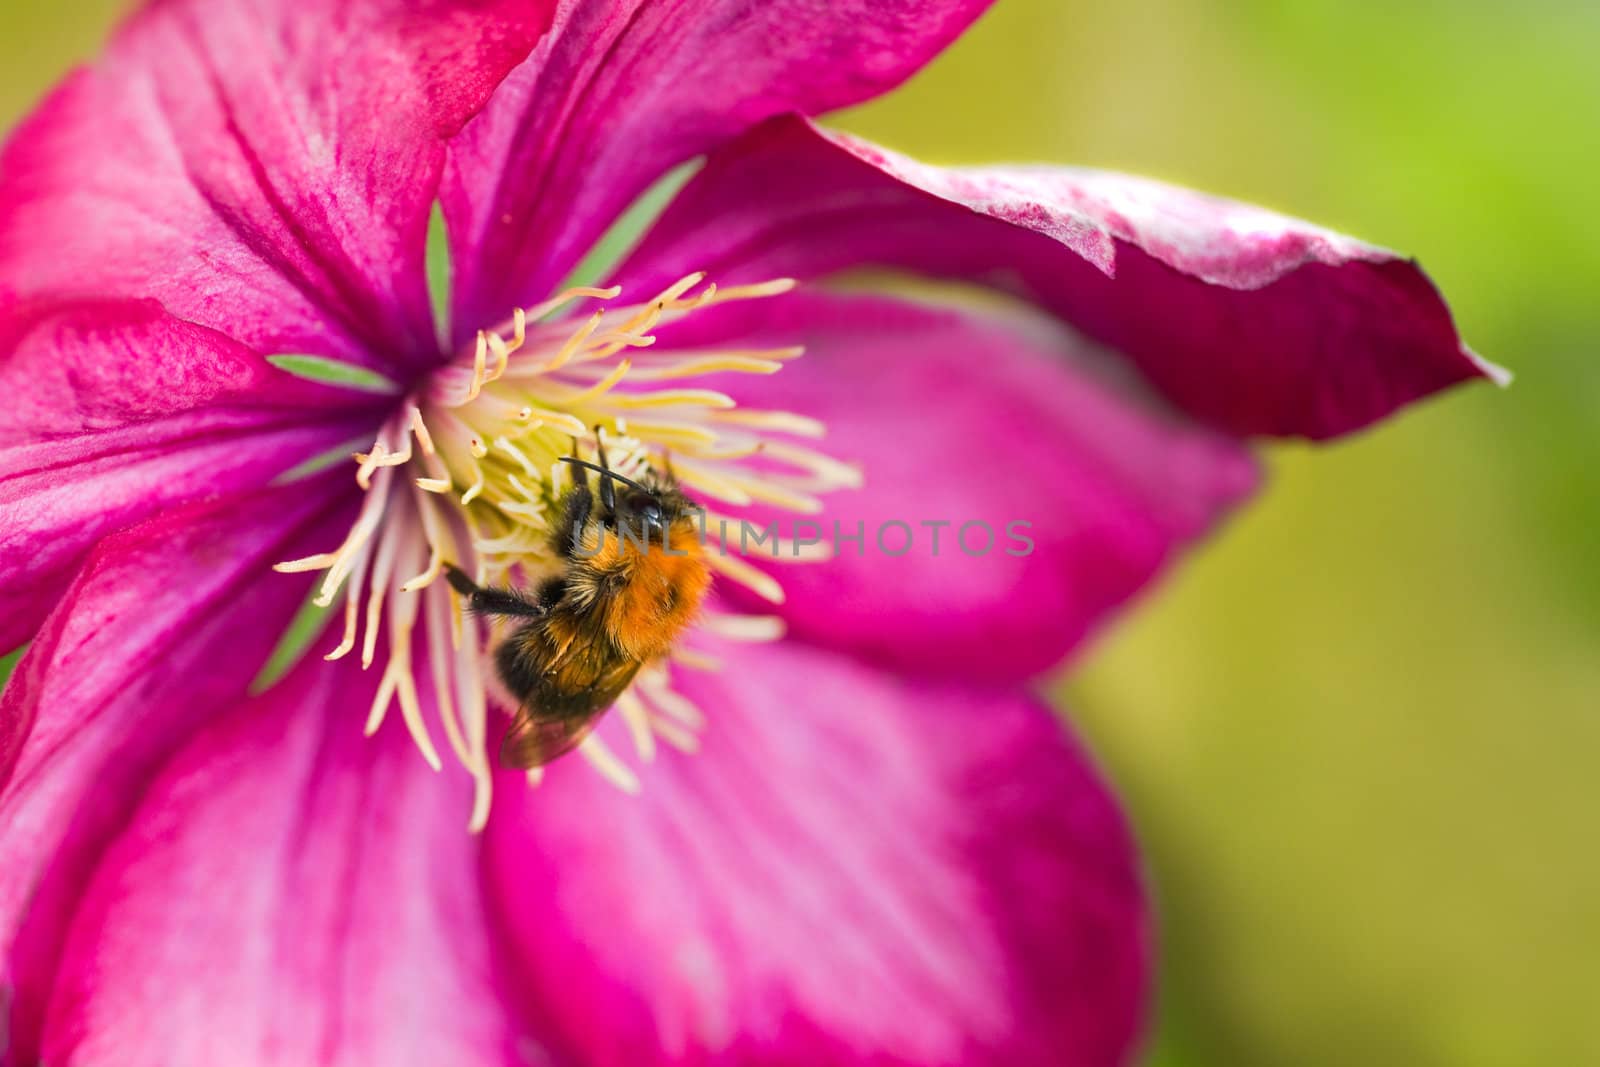 Bumble bee on pink Clematis flower by Colette